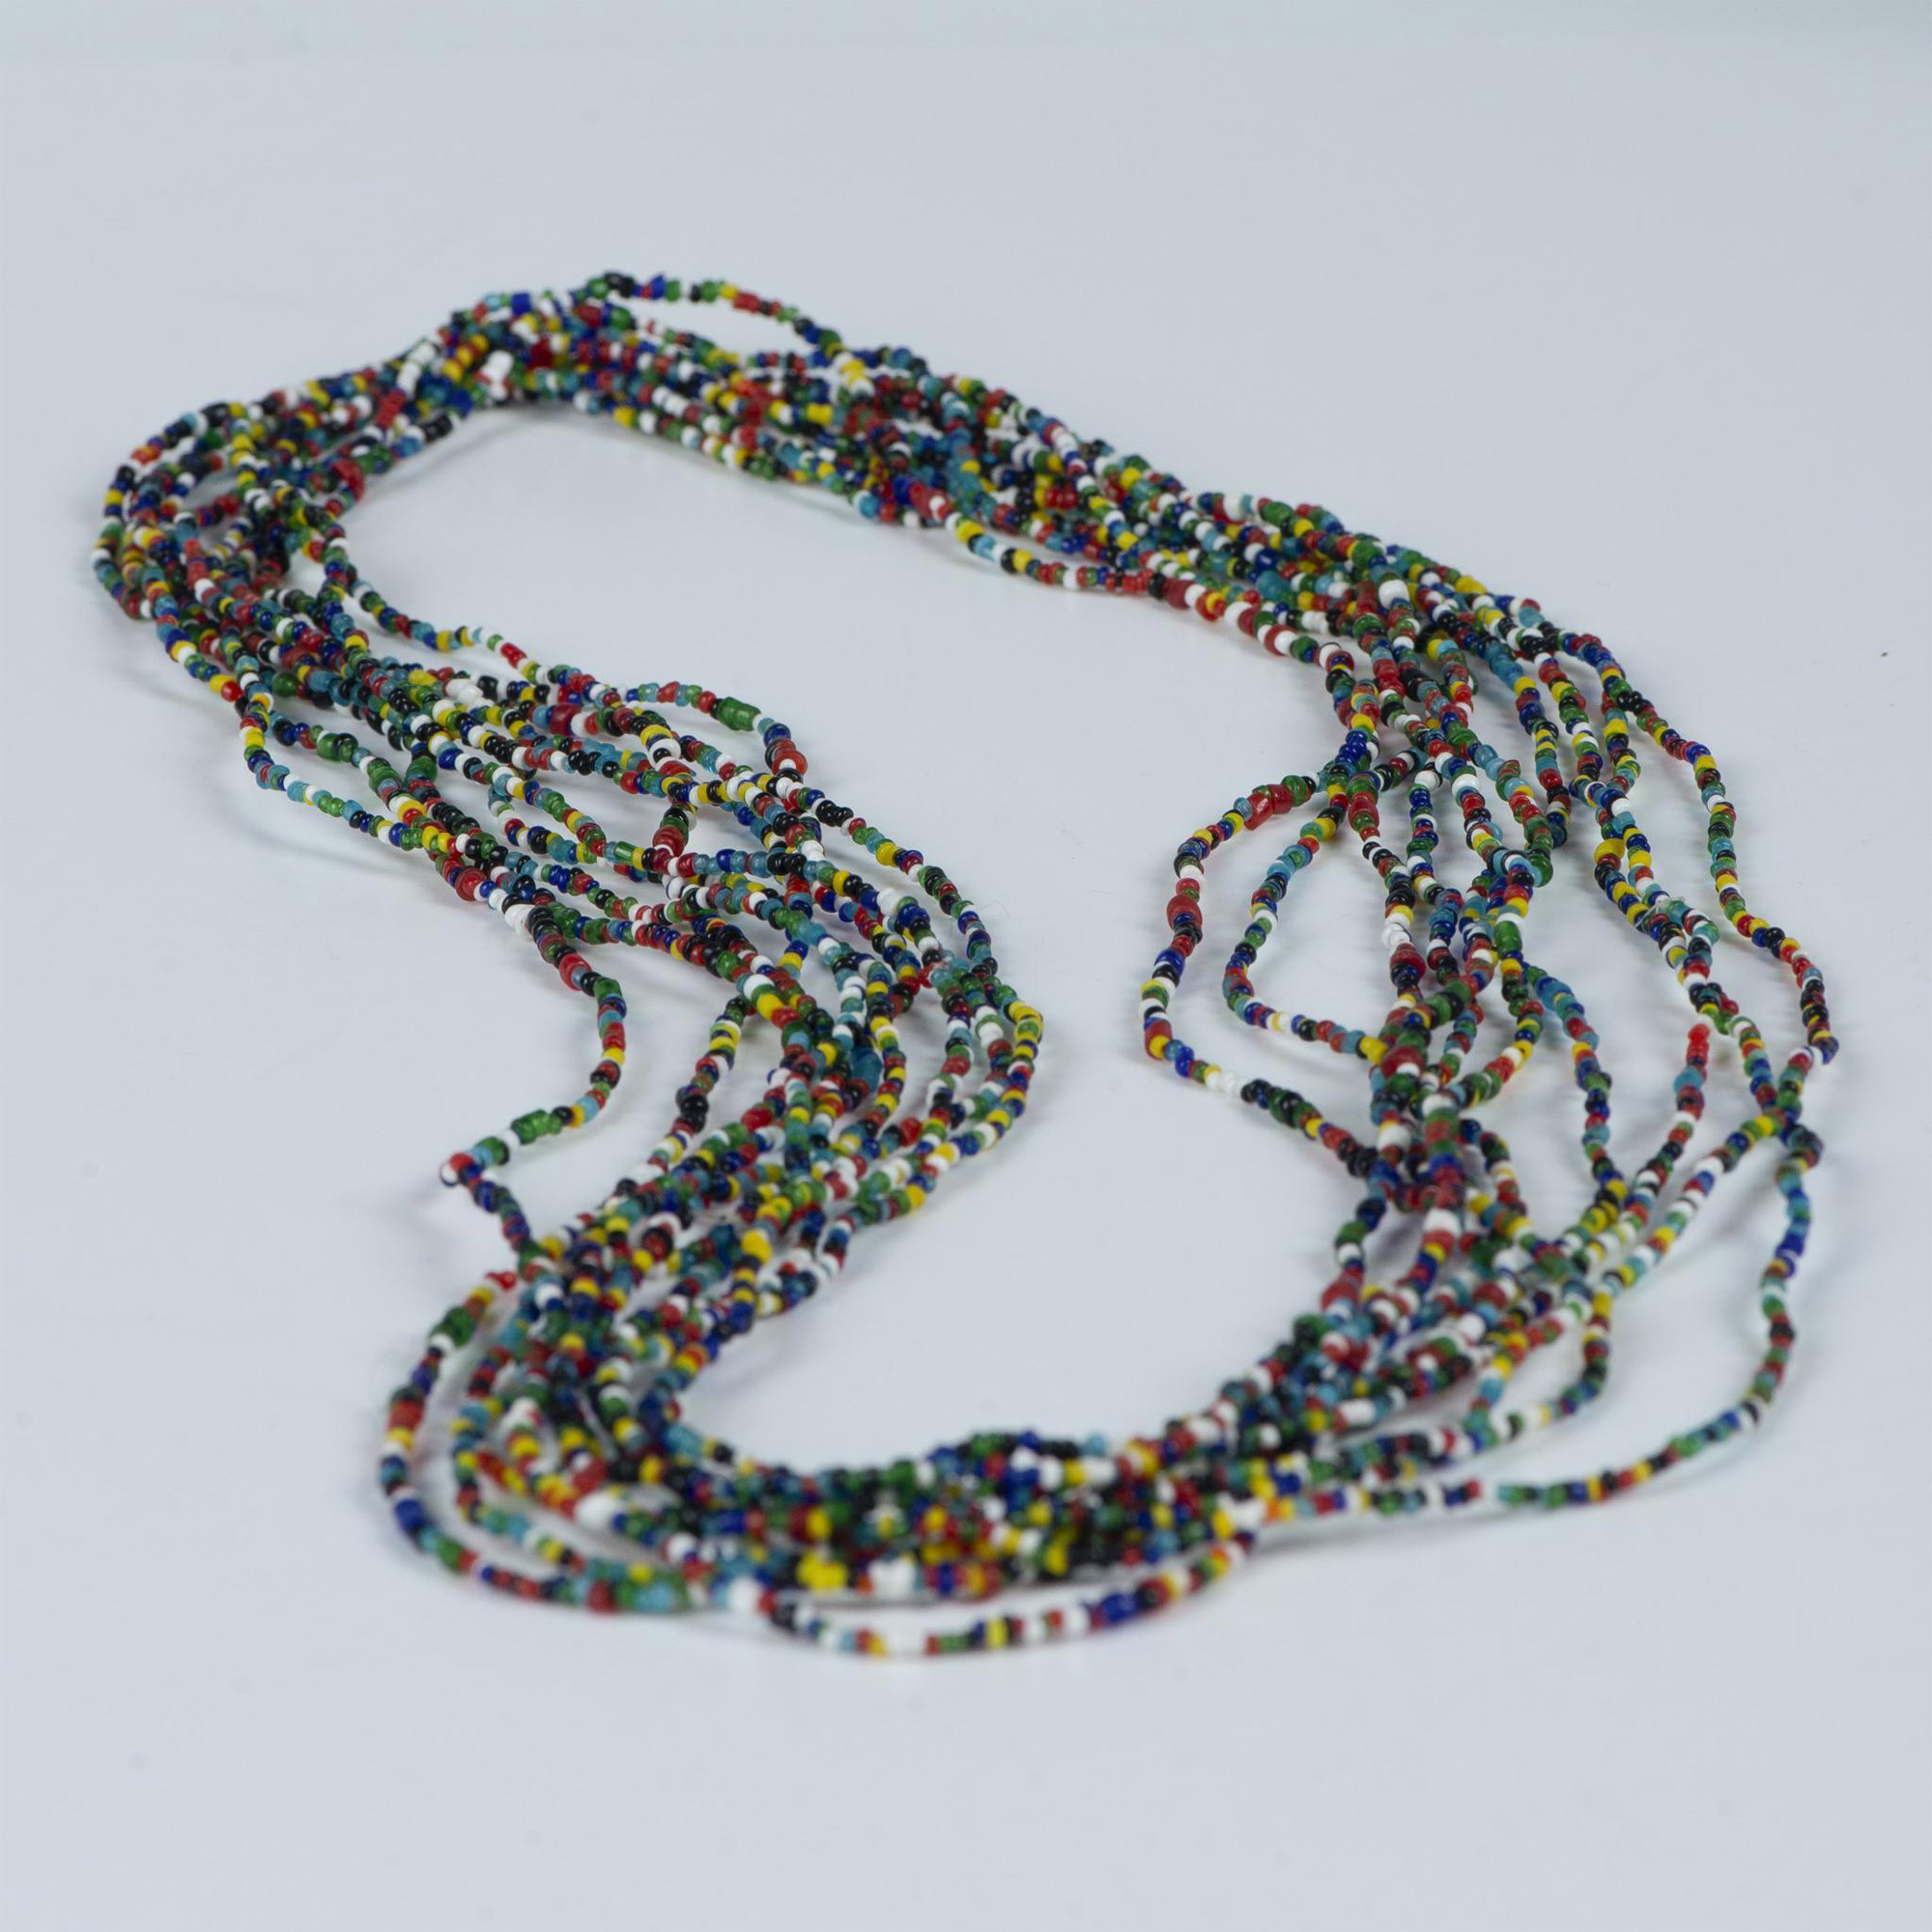 5pc Native American Extra Long Colorful Beaded Necklaces - Image 4 of 5